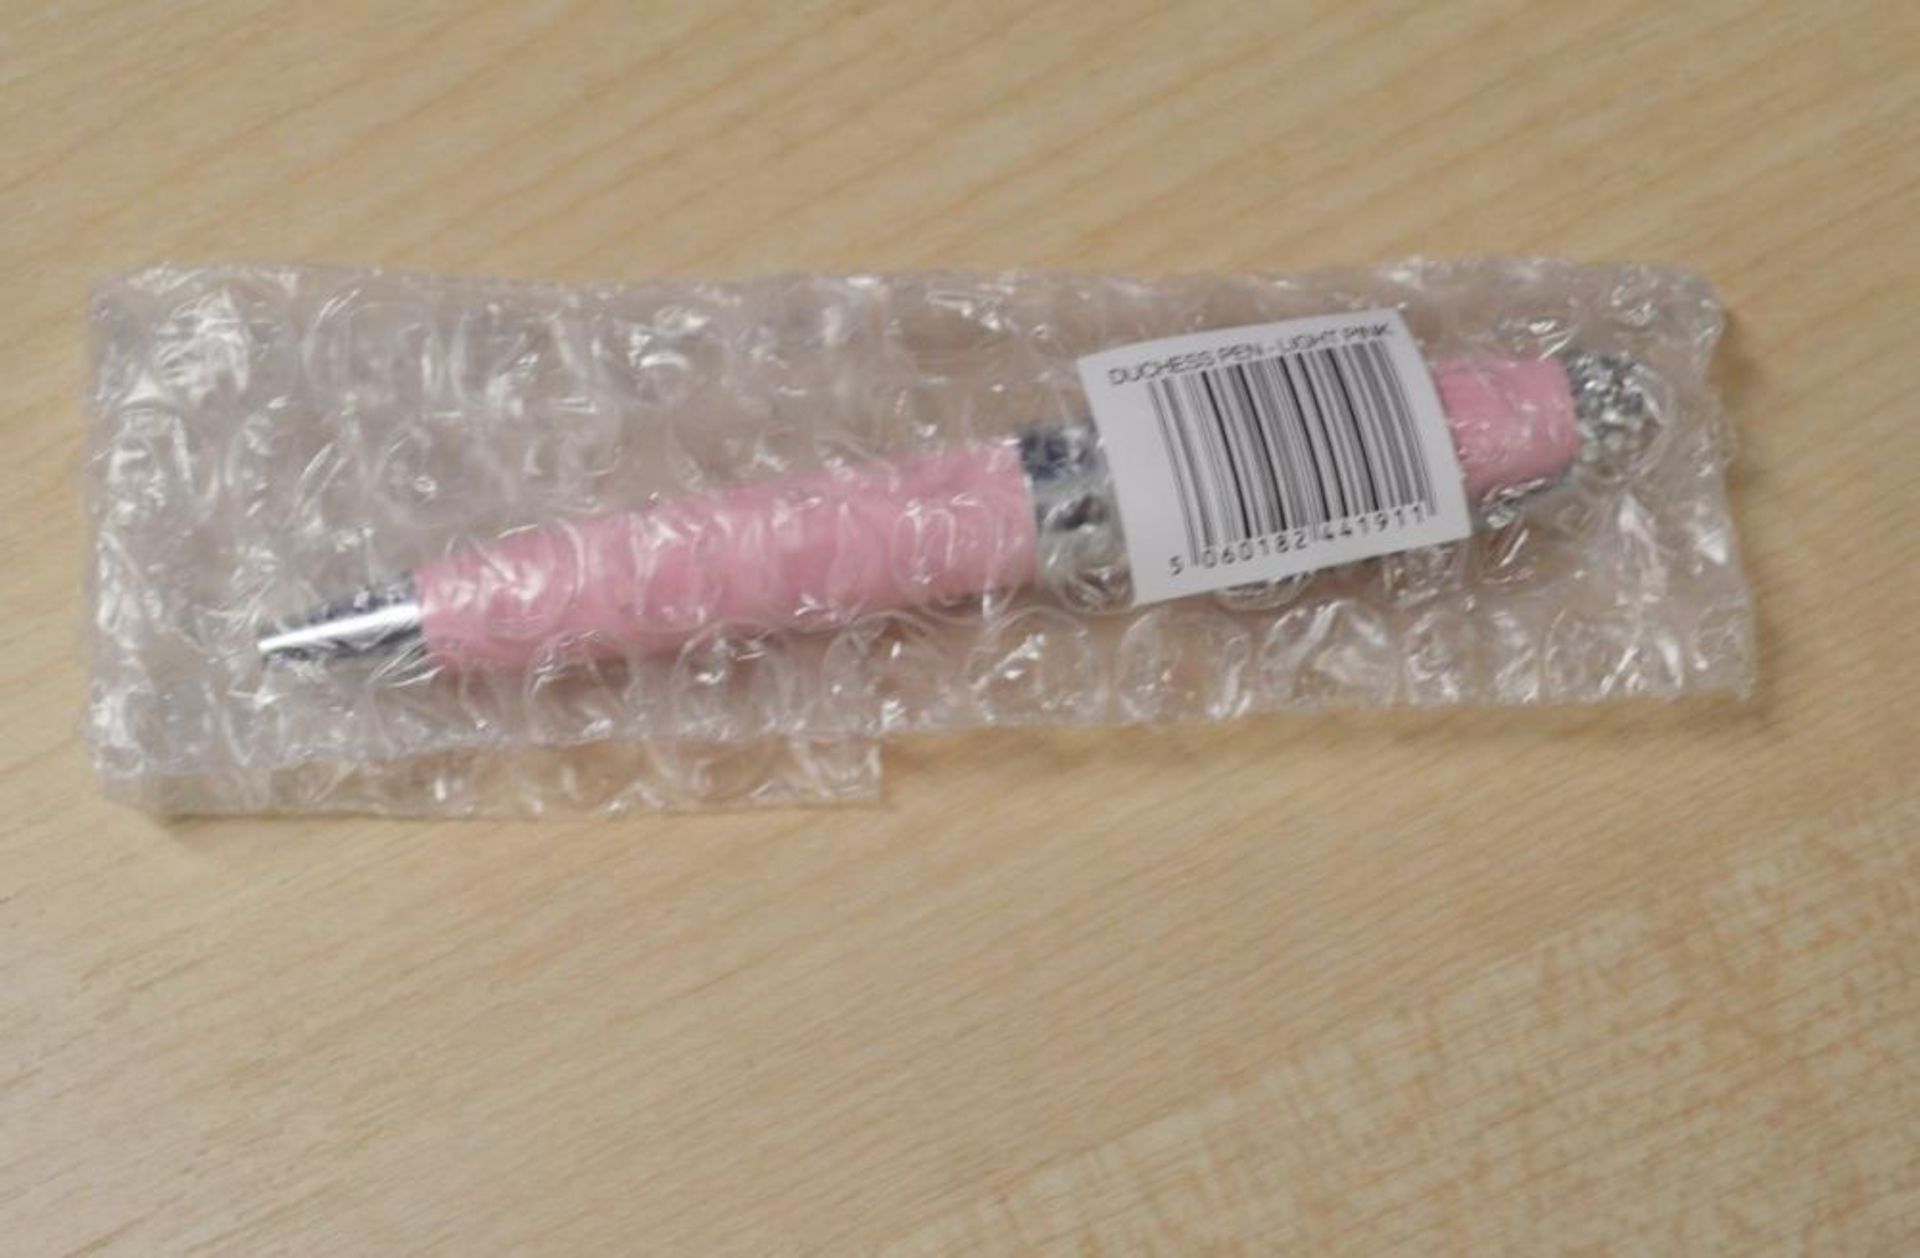 1 x ICE LONDON "Duchess" Ladies Pen Embellished With SWAROVSKI Crystals - Colour: Light Pink - Brand - Image 2 of 3